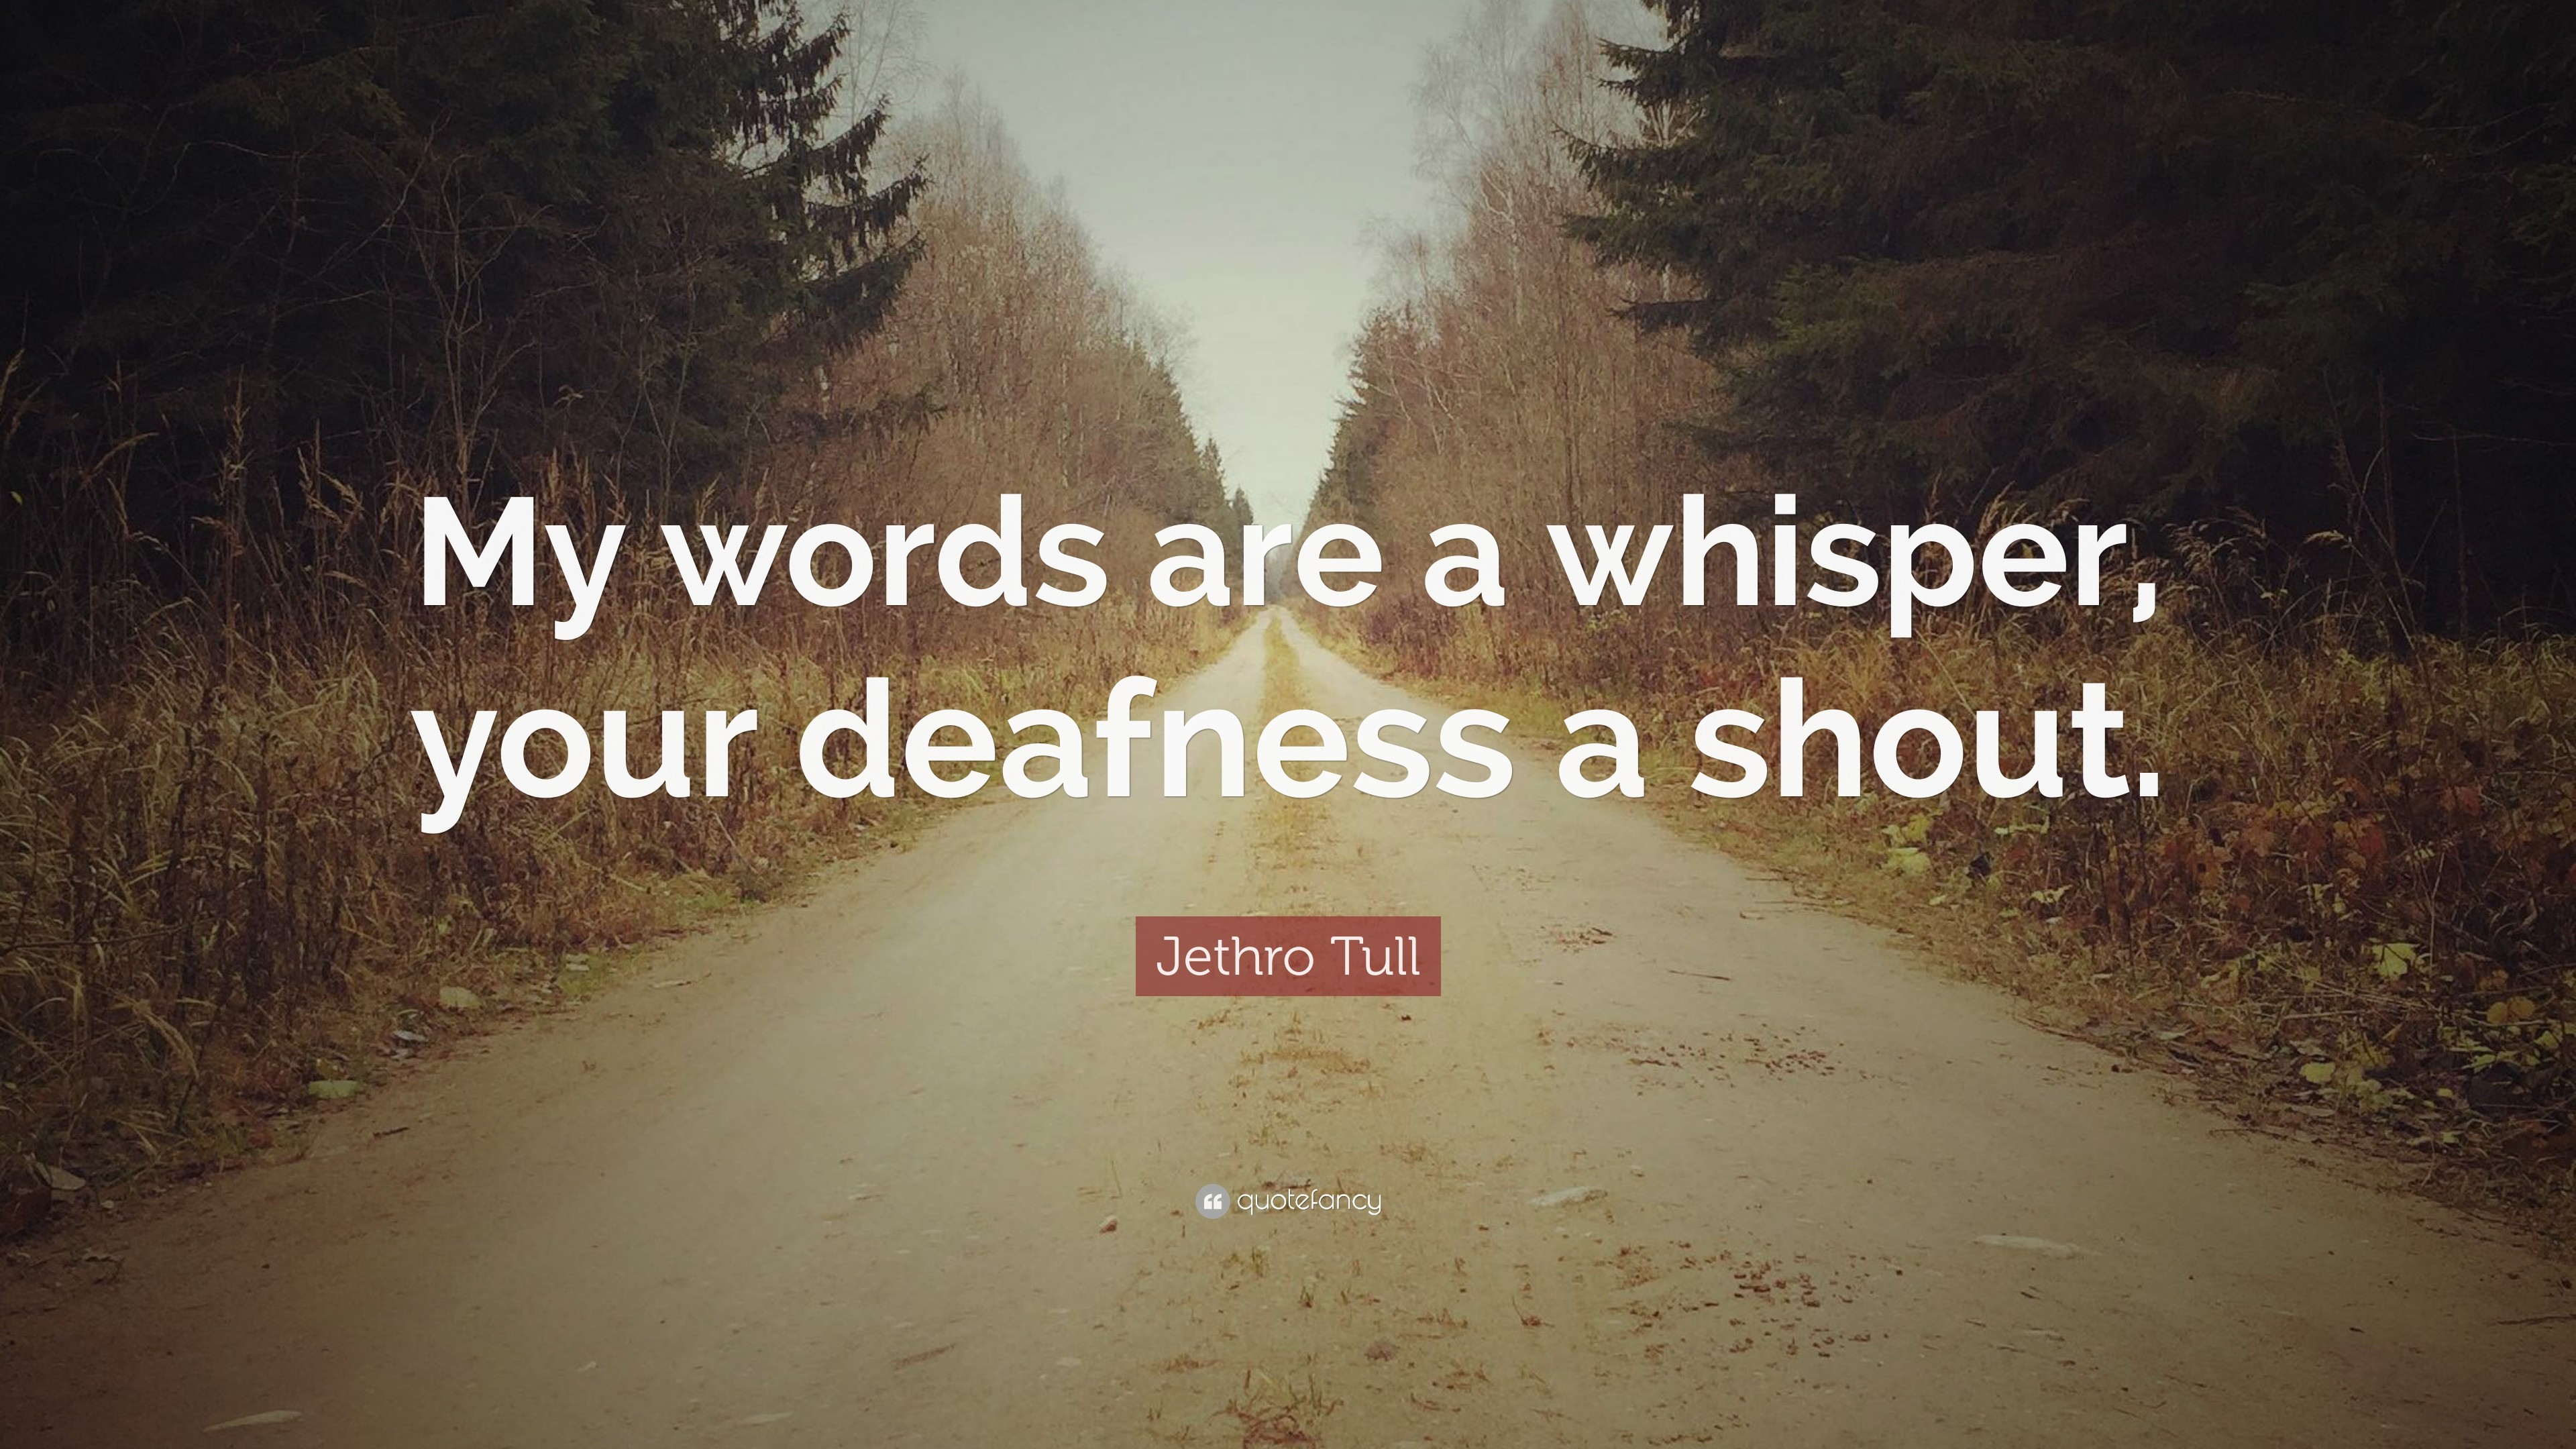 3840x2160 Jethro Tull Quote: “My words are a whisper, your deafness a shout.